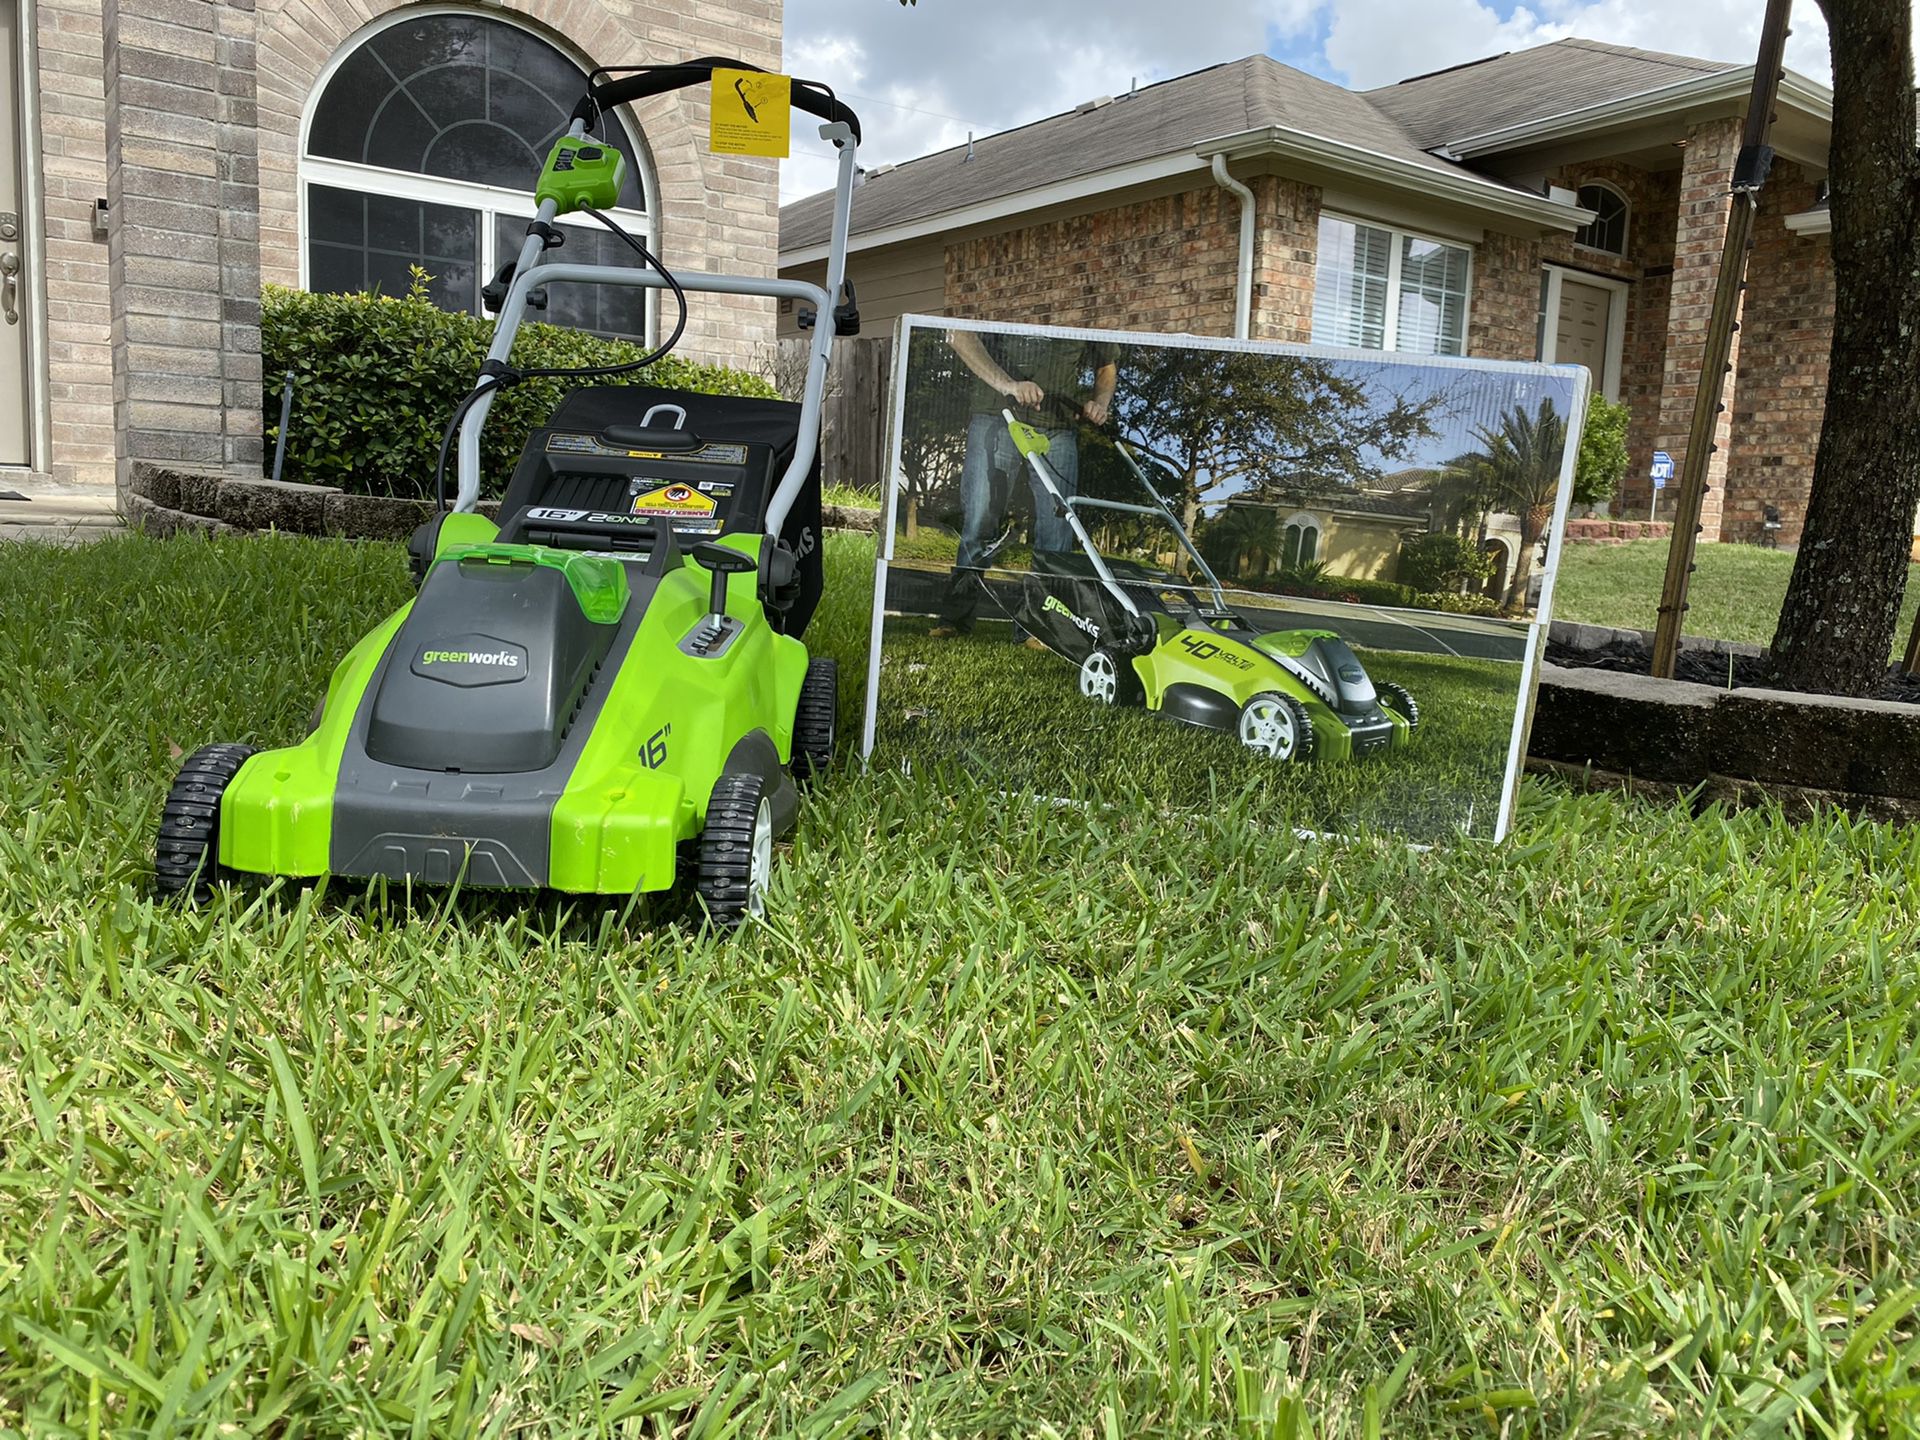 Like new Greenworks 16-Inch 40V Cordless Lawn Mower, come with Battery, price nego